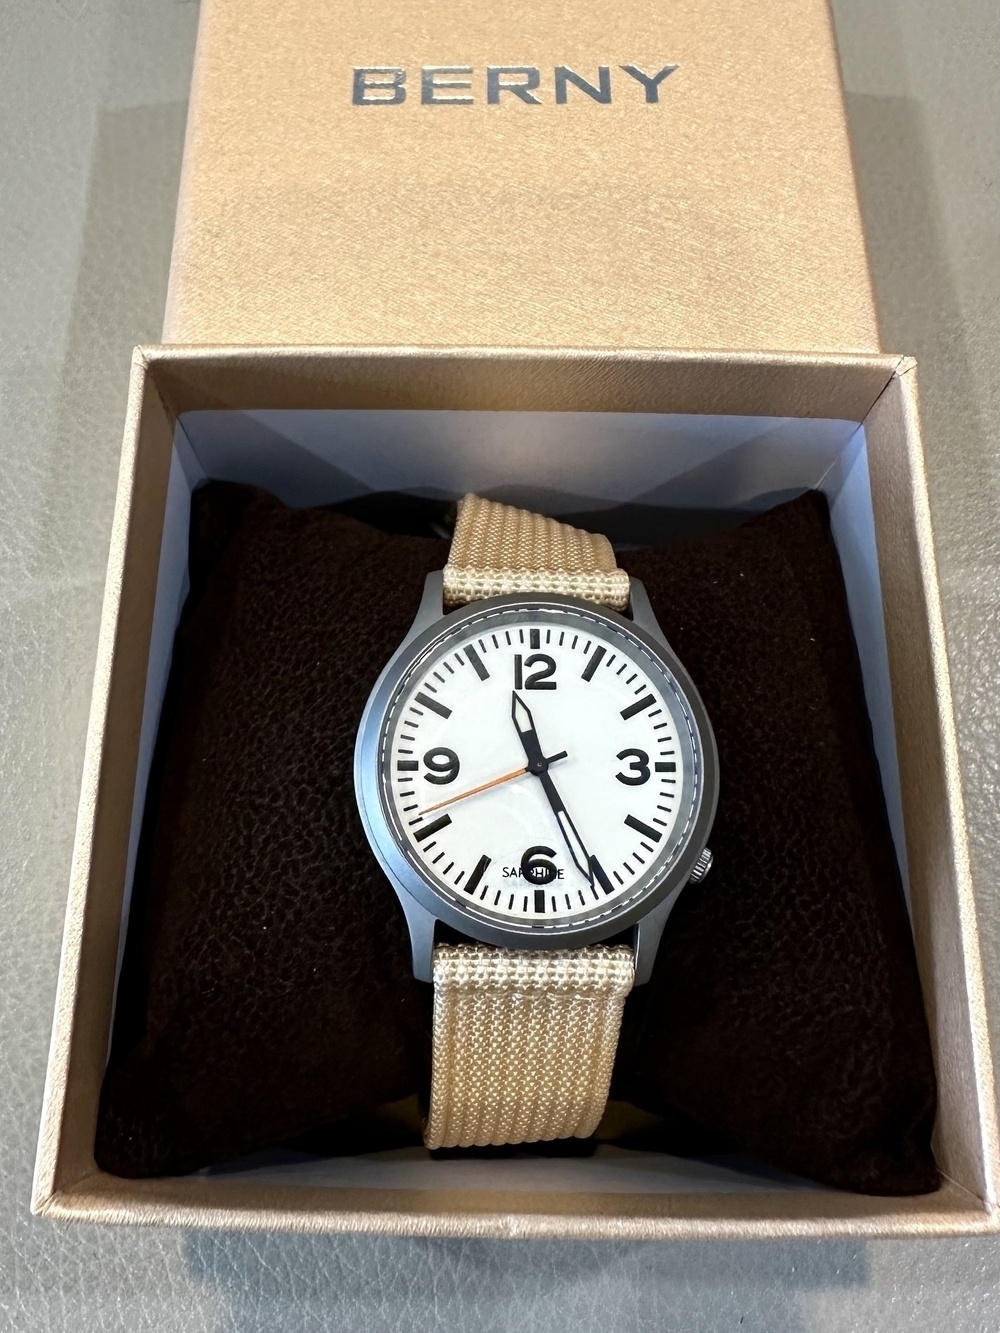 An analog watch sitting on a dark cushion inside a box. The watch has a white face with large dark 3/6/9/12 and a red second hand. The canvas strap is a cream colour.